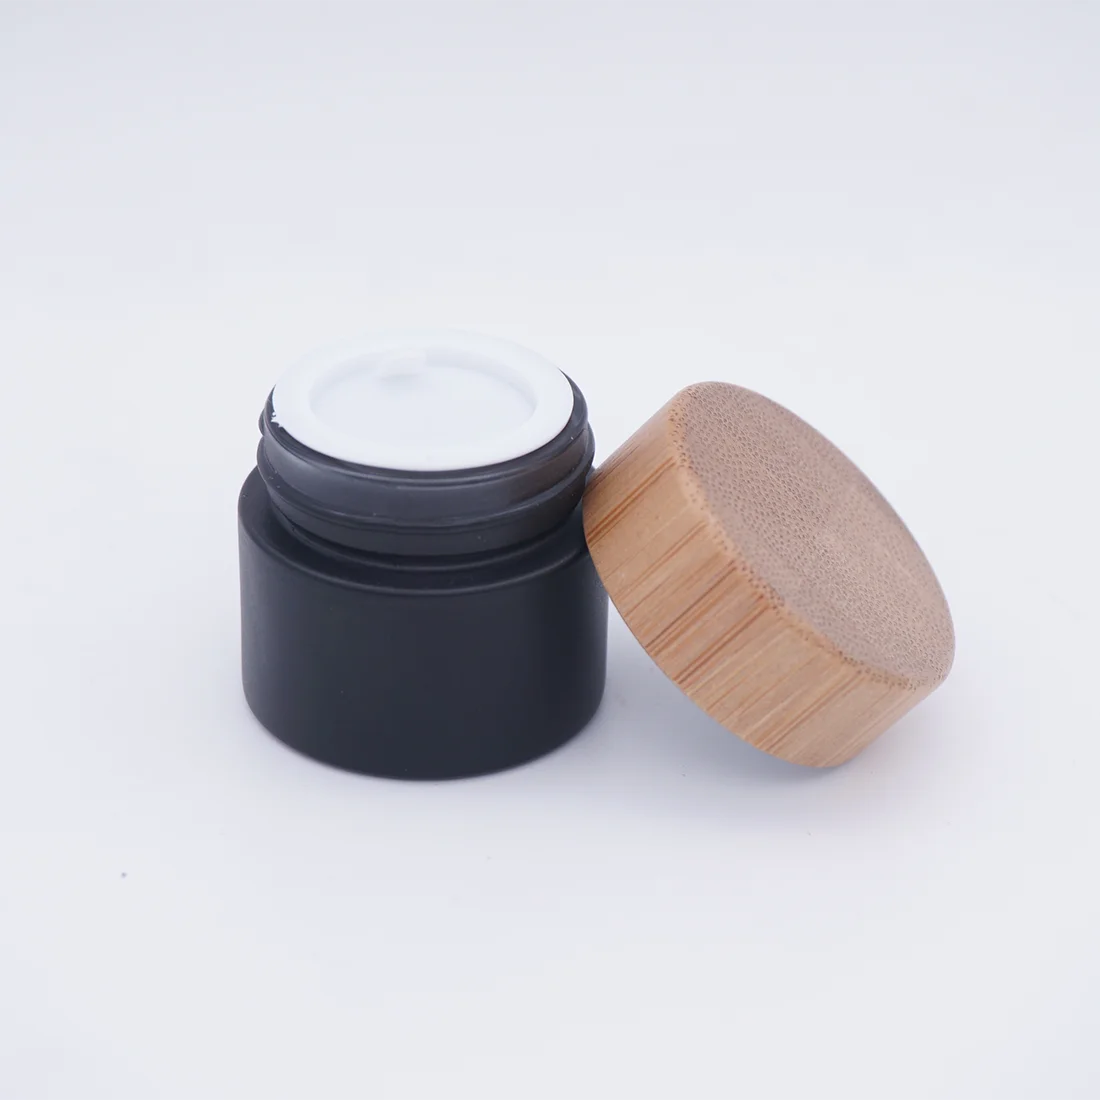 Download Matte Black Glass Cream Containers Cosmetic Jar With Bamboo Lid Buy Cream Containers Cosmetic Glass Cream Containers Cosmetic Black Cream Containers Cosmetic Product On Alibaba Com